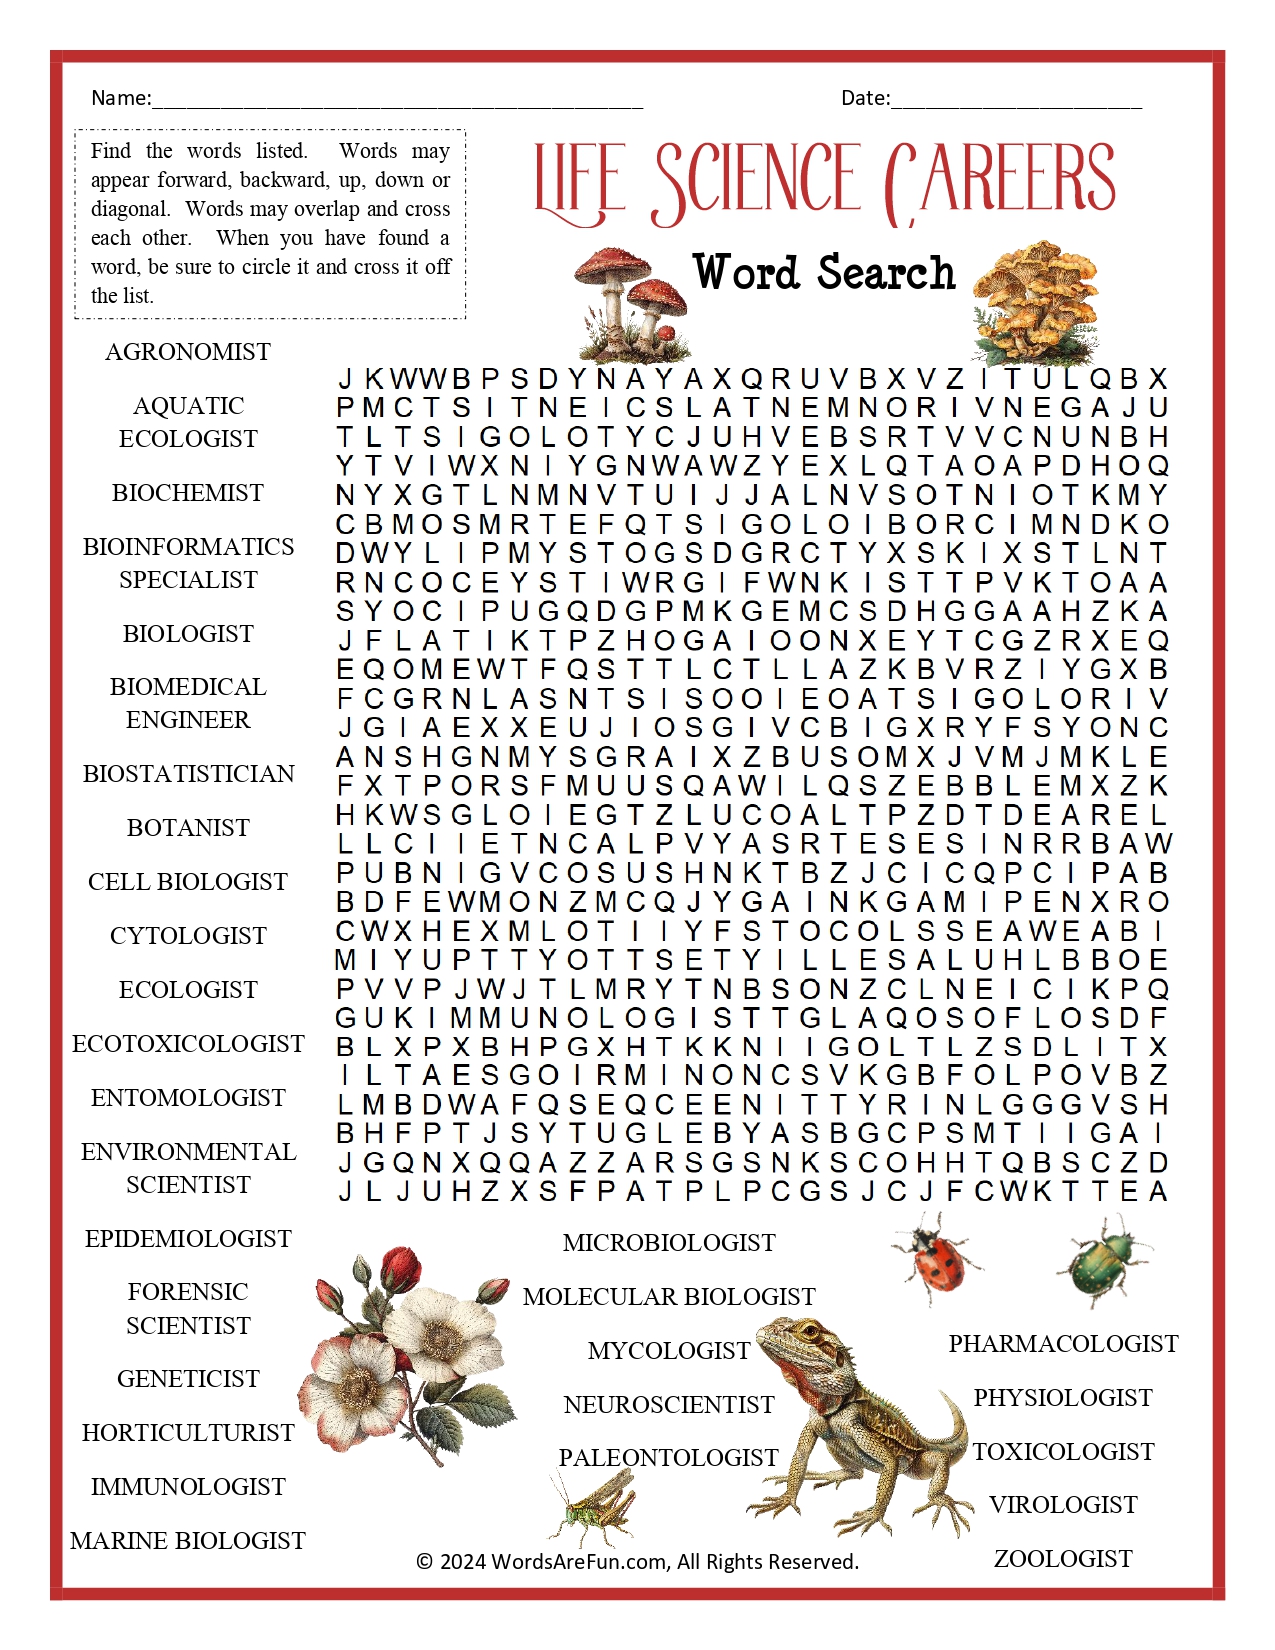 Life Science Careers Word Search